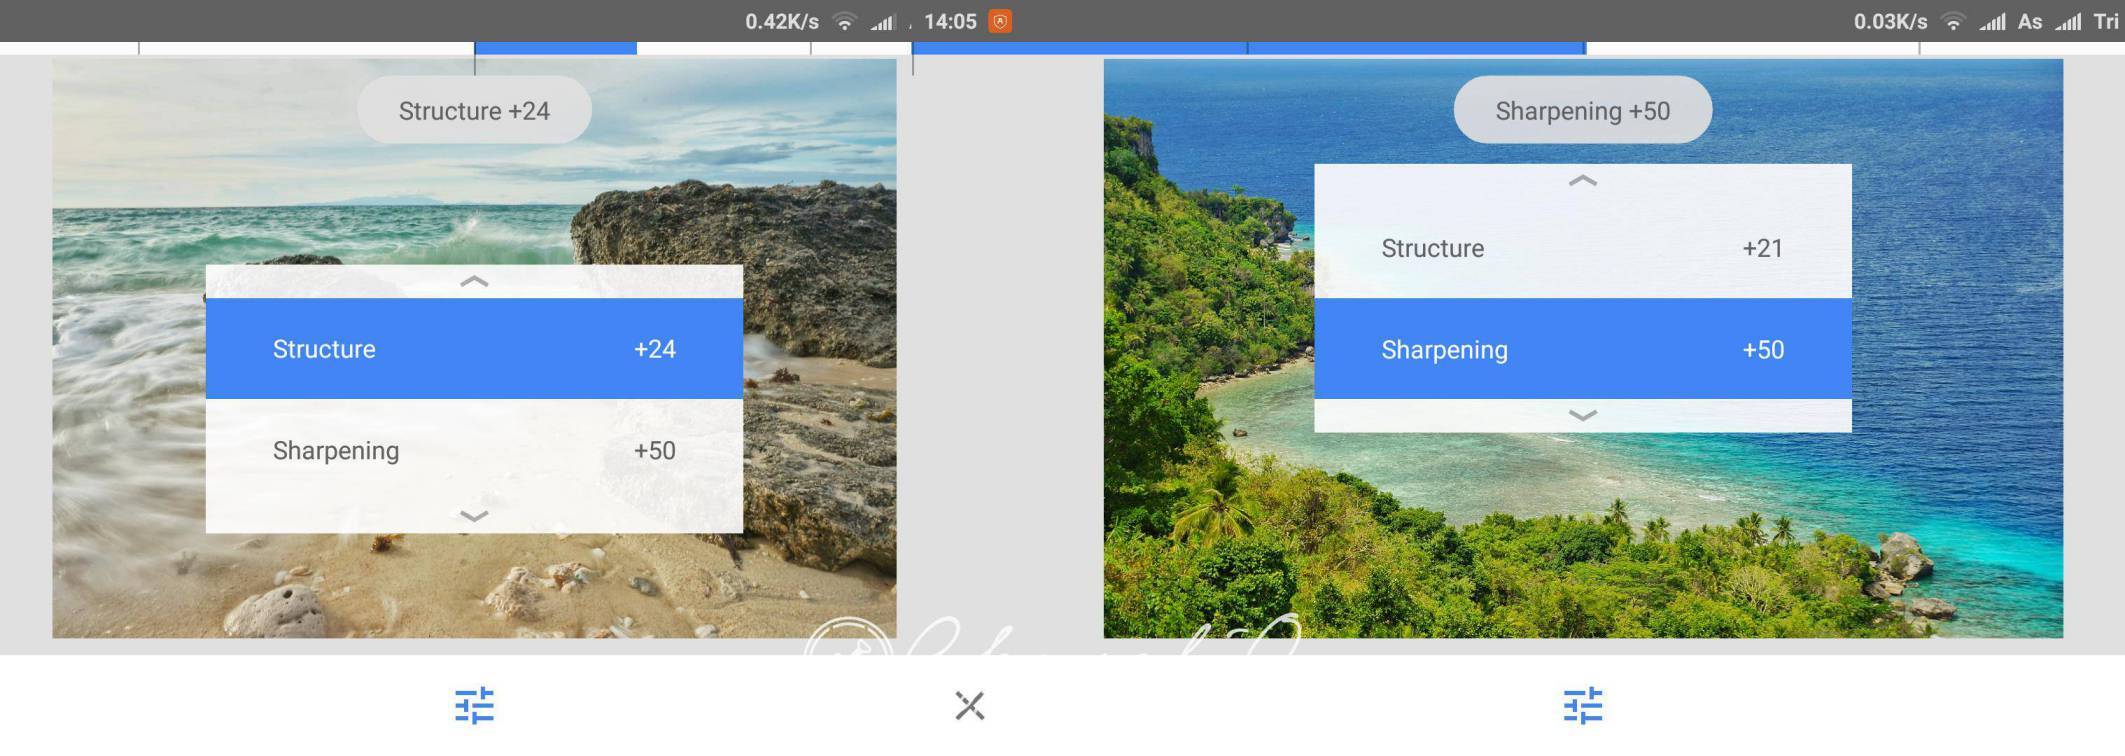 Edit foto landscape di snapseed android